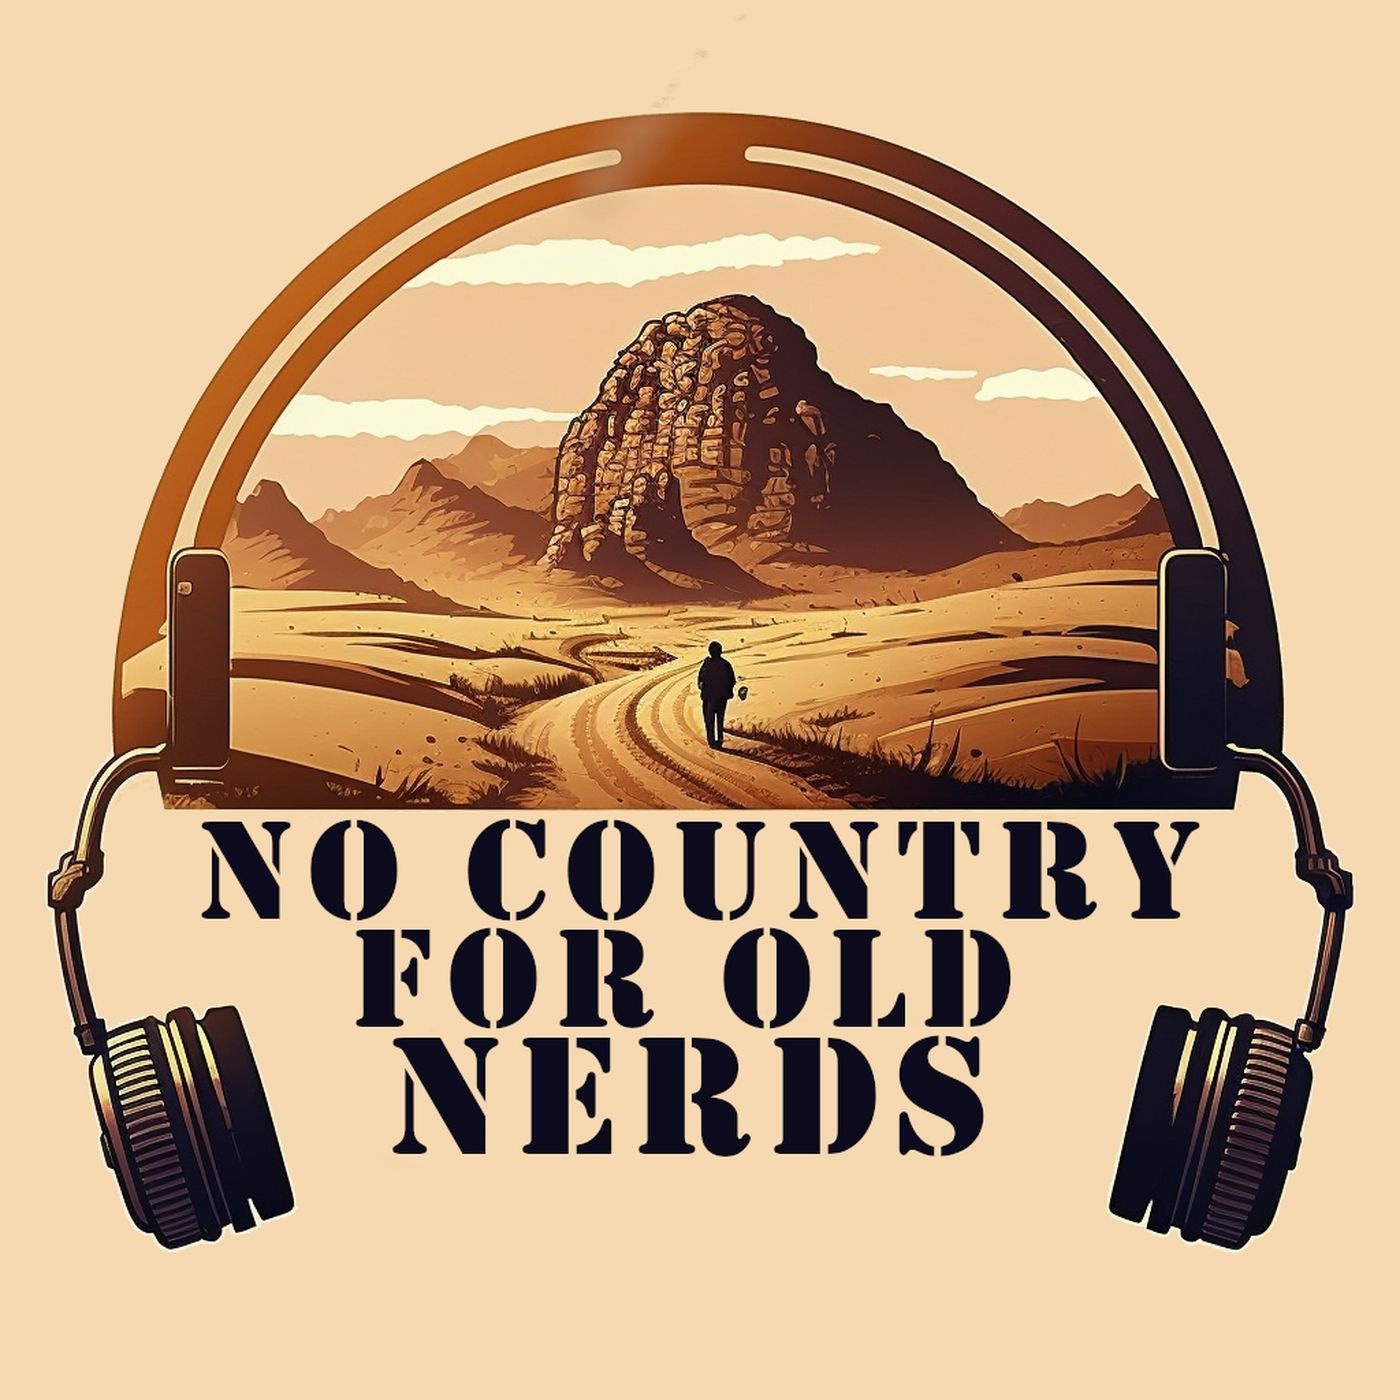 No Country for Old Nerds